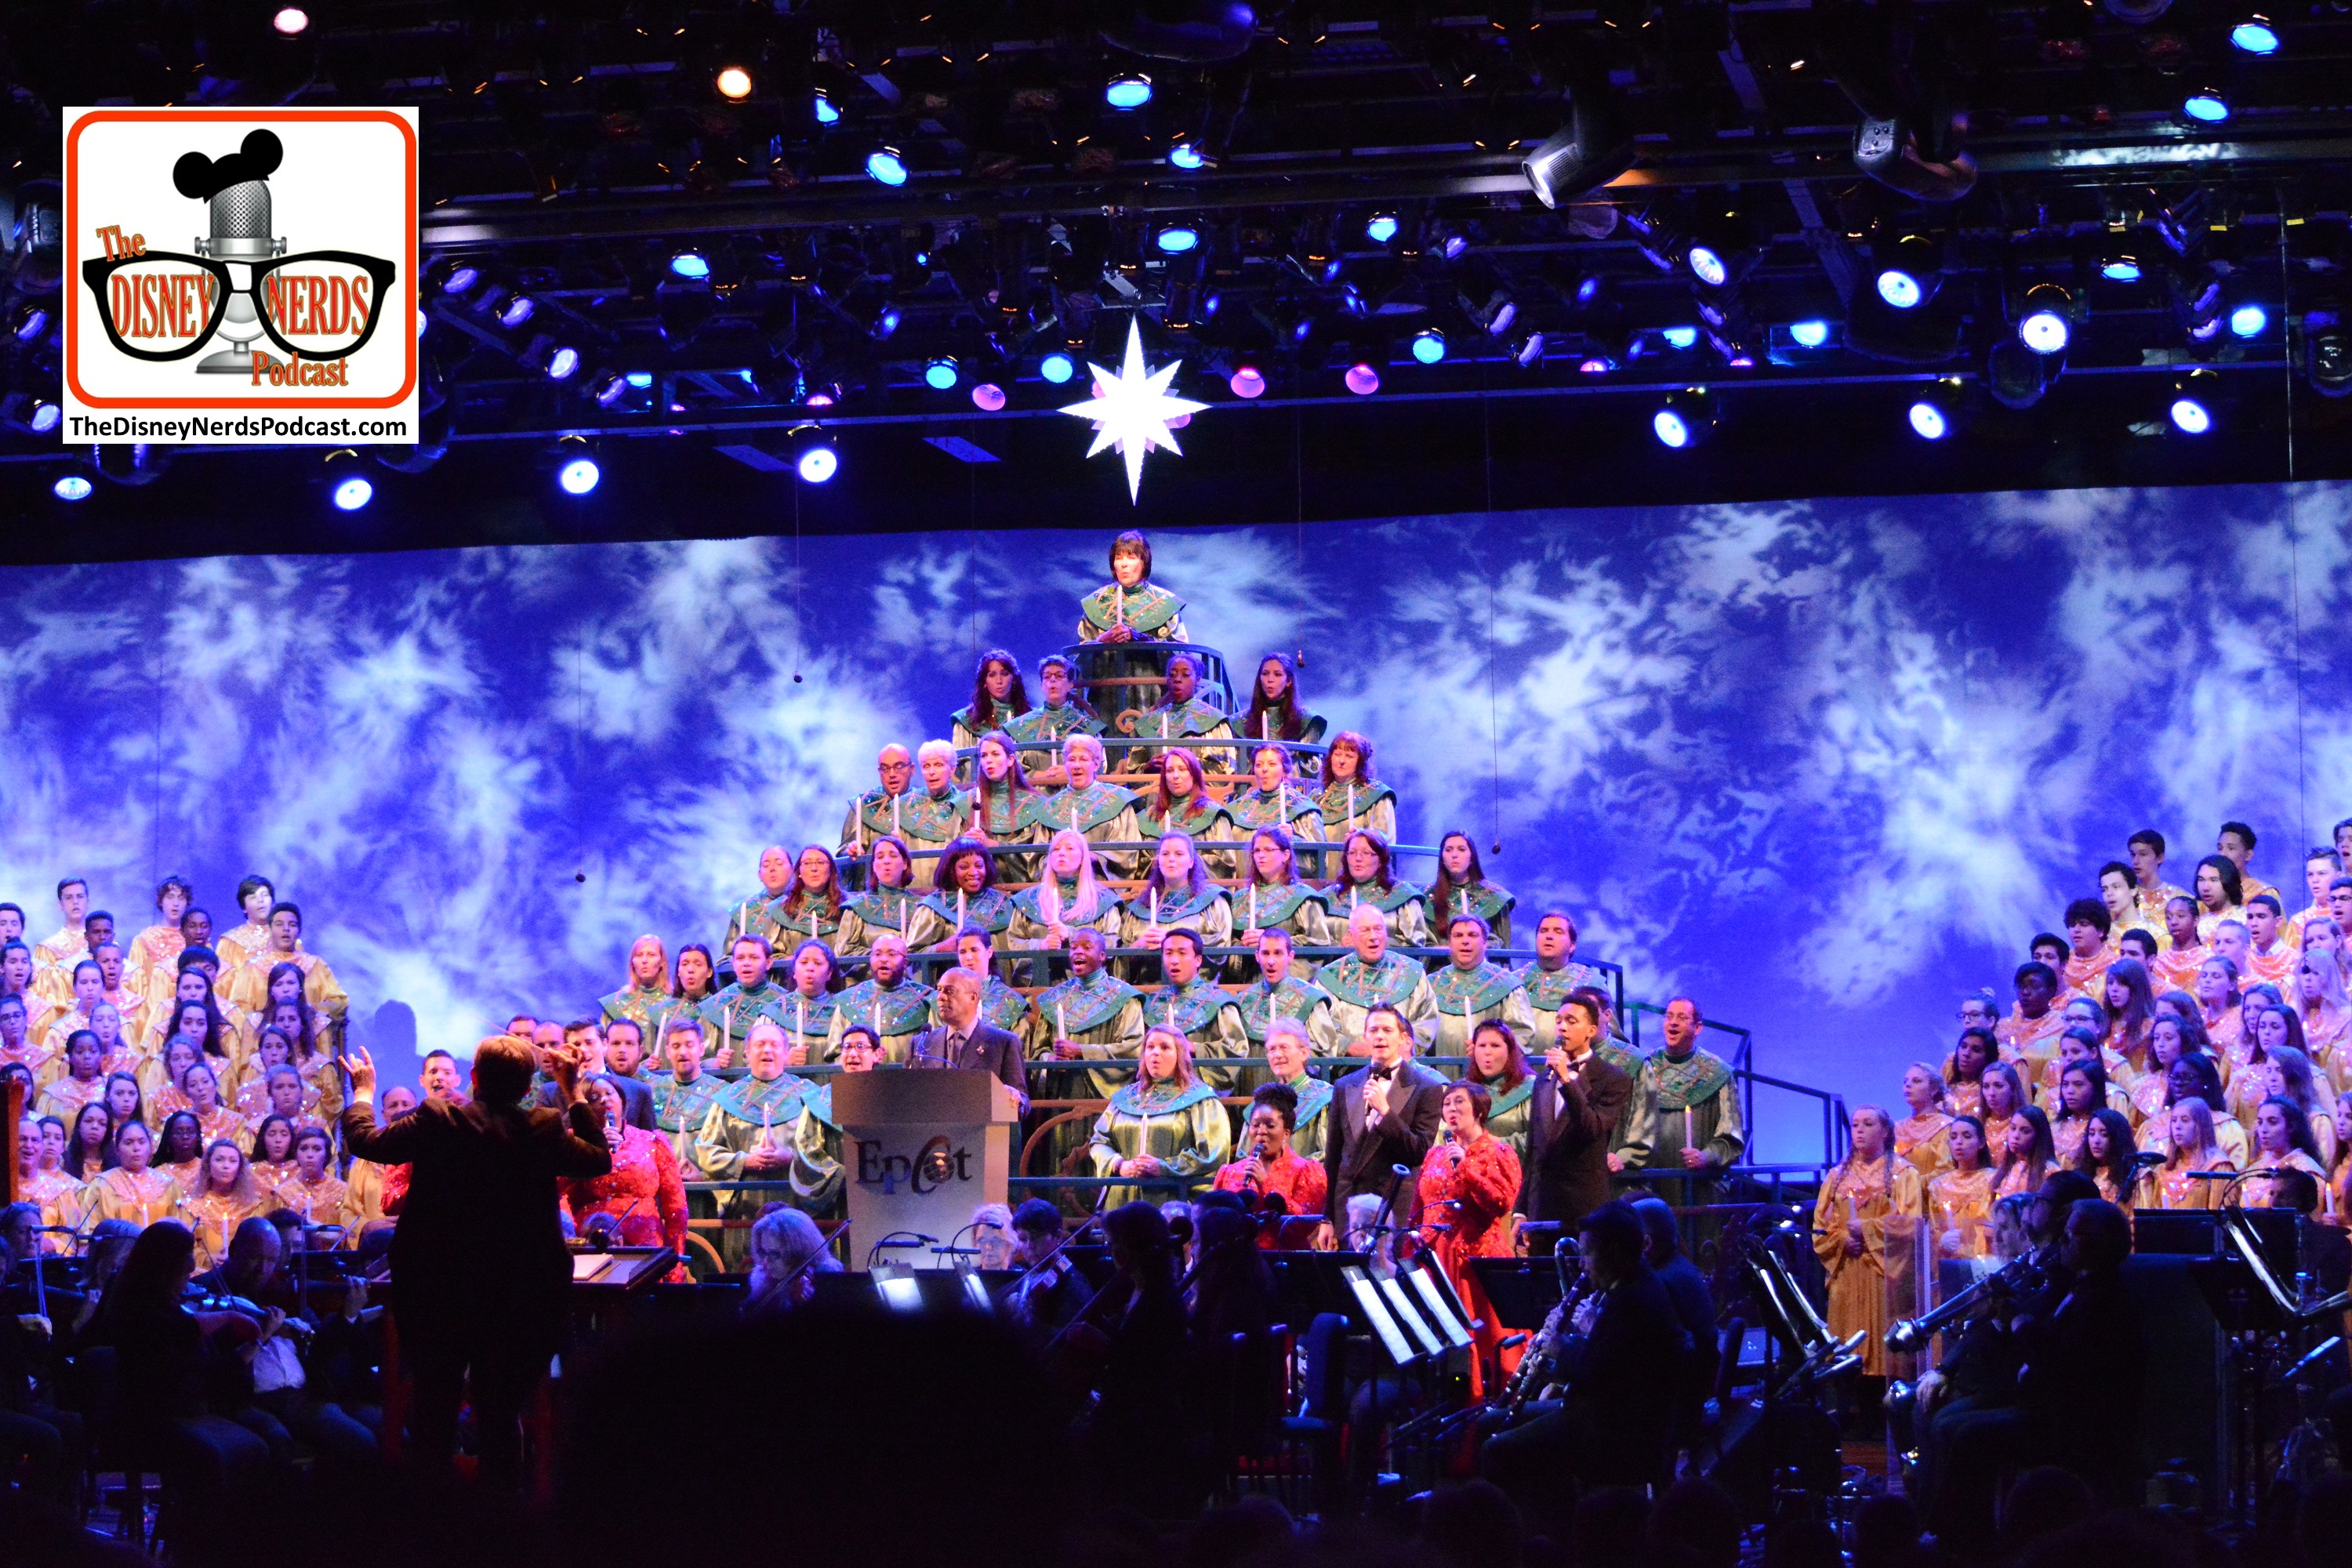 2015-12 - Epcot - The Candlelight Processional is a must see in the American Garden Theater - Here Joe Morton Narrates